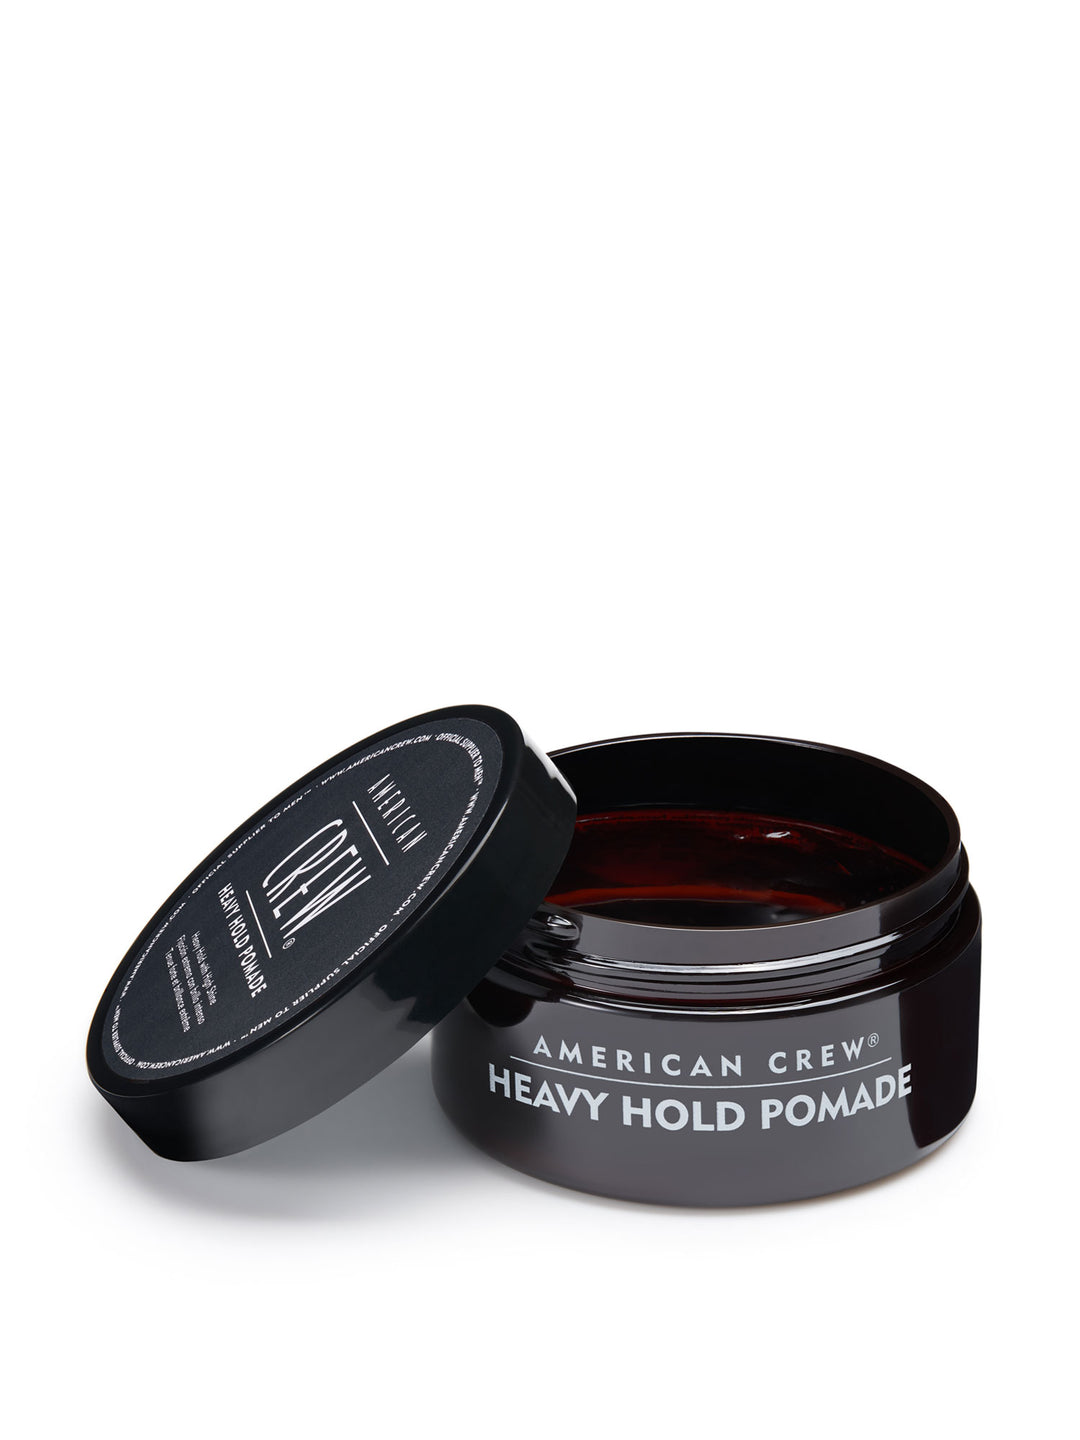 Hair Pomade, - Crew American and Gel, Cream, Hair Products Styling